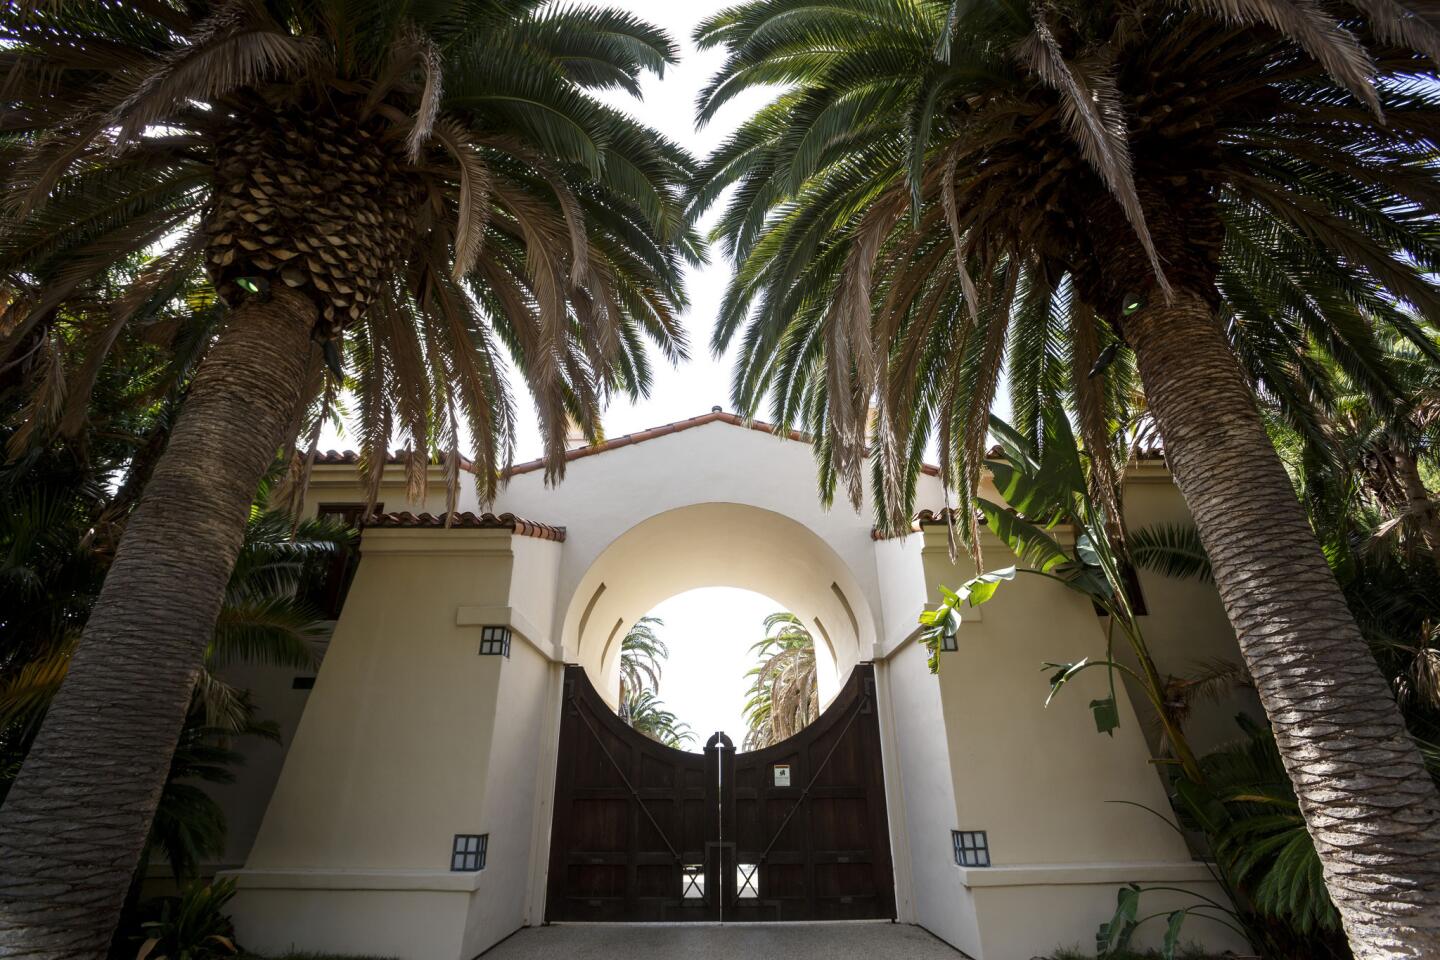 Entrance gate to the home owned by a top official of the African nation of Equatorial Guinea on a hill overlooking the Malibu Pier.